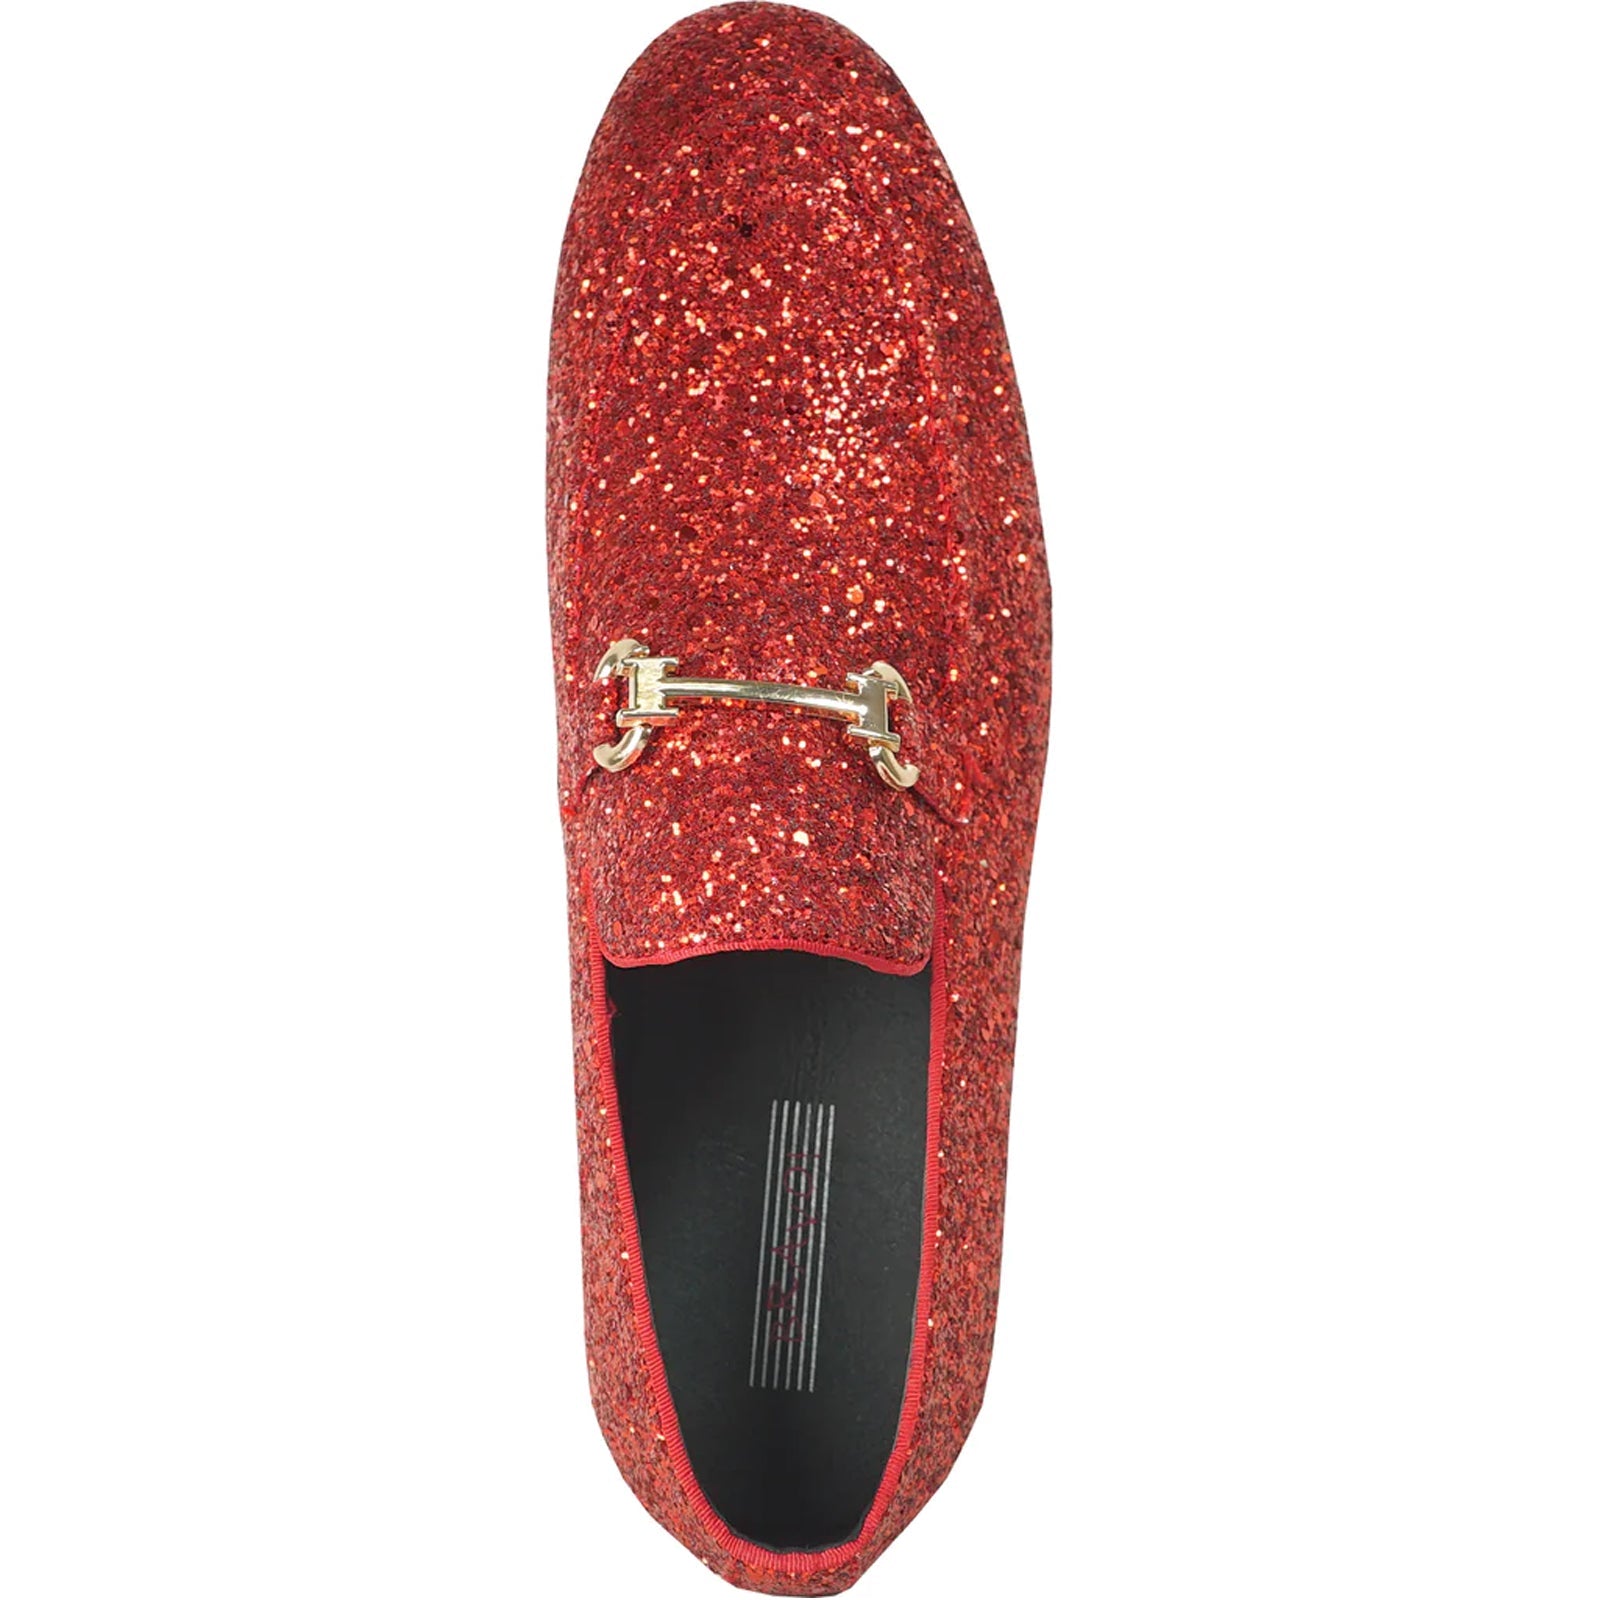 Red Sequin Prom Tuxedo Loafers - Modern Men's Glitter Buckle Shoes